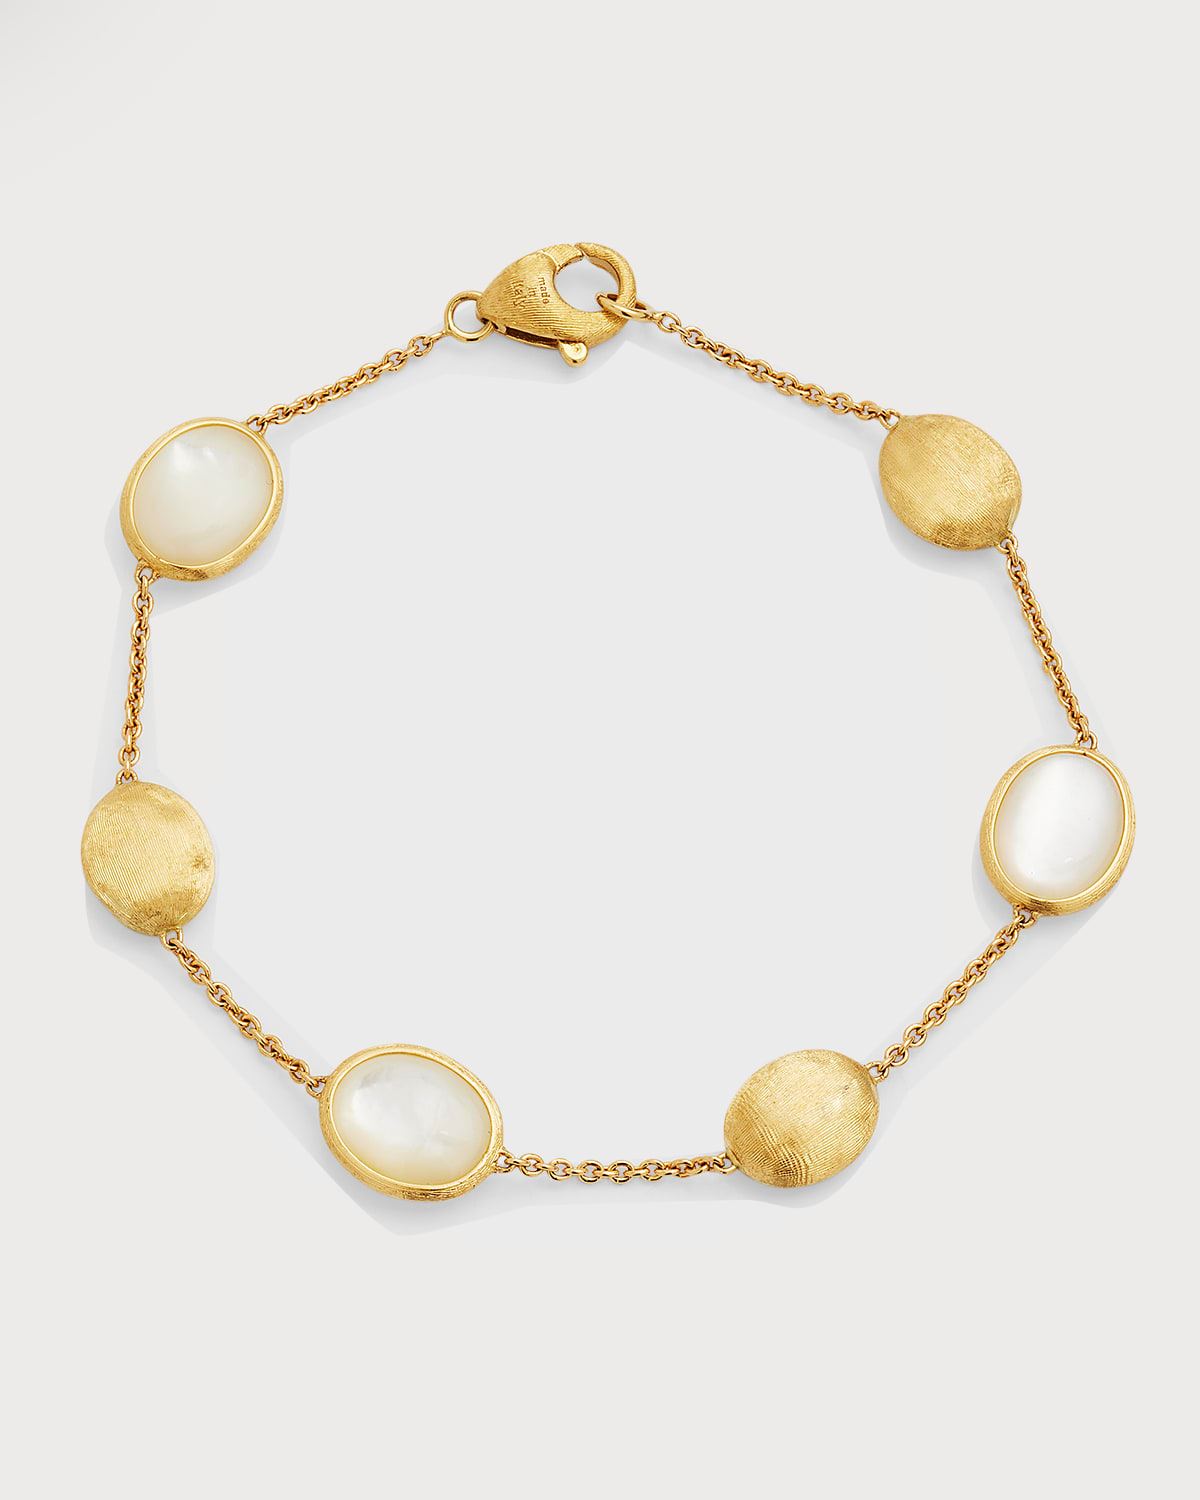 18K Yellow Gold and Mother-of-Pearl Bracelet